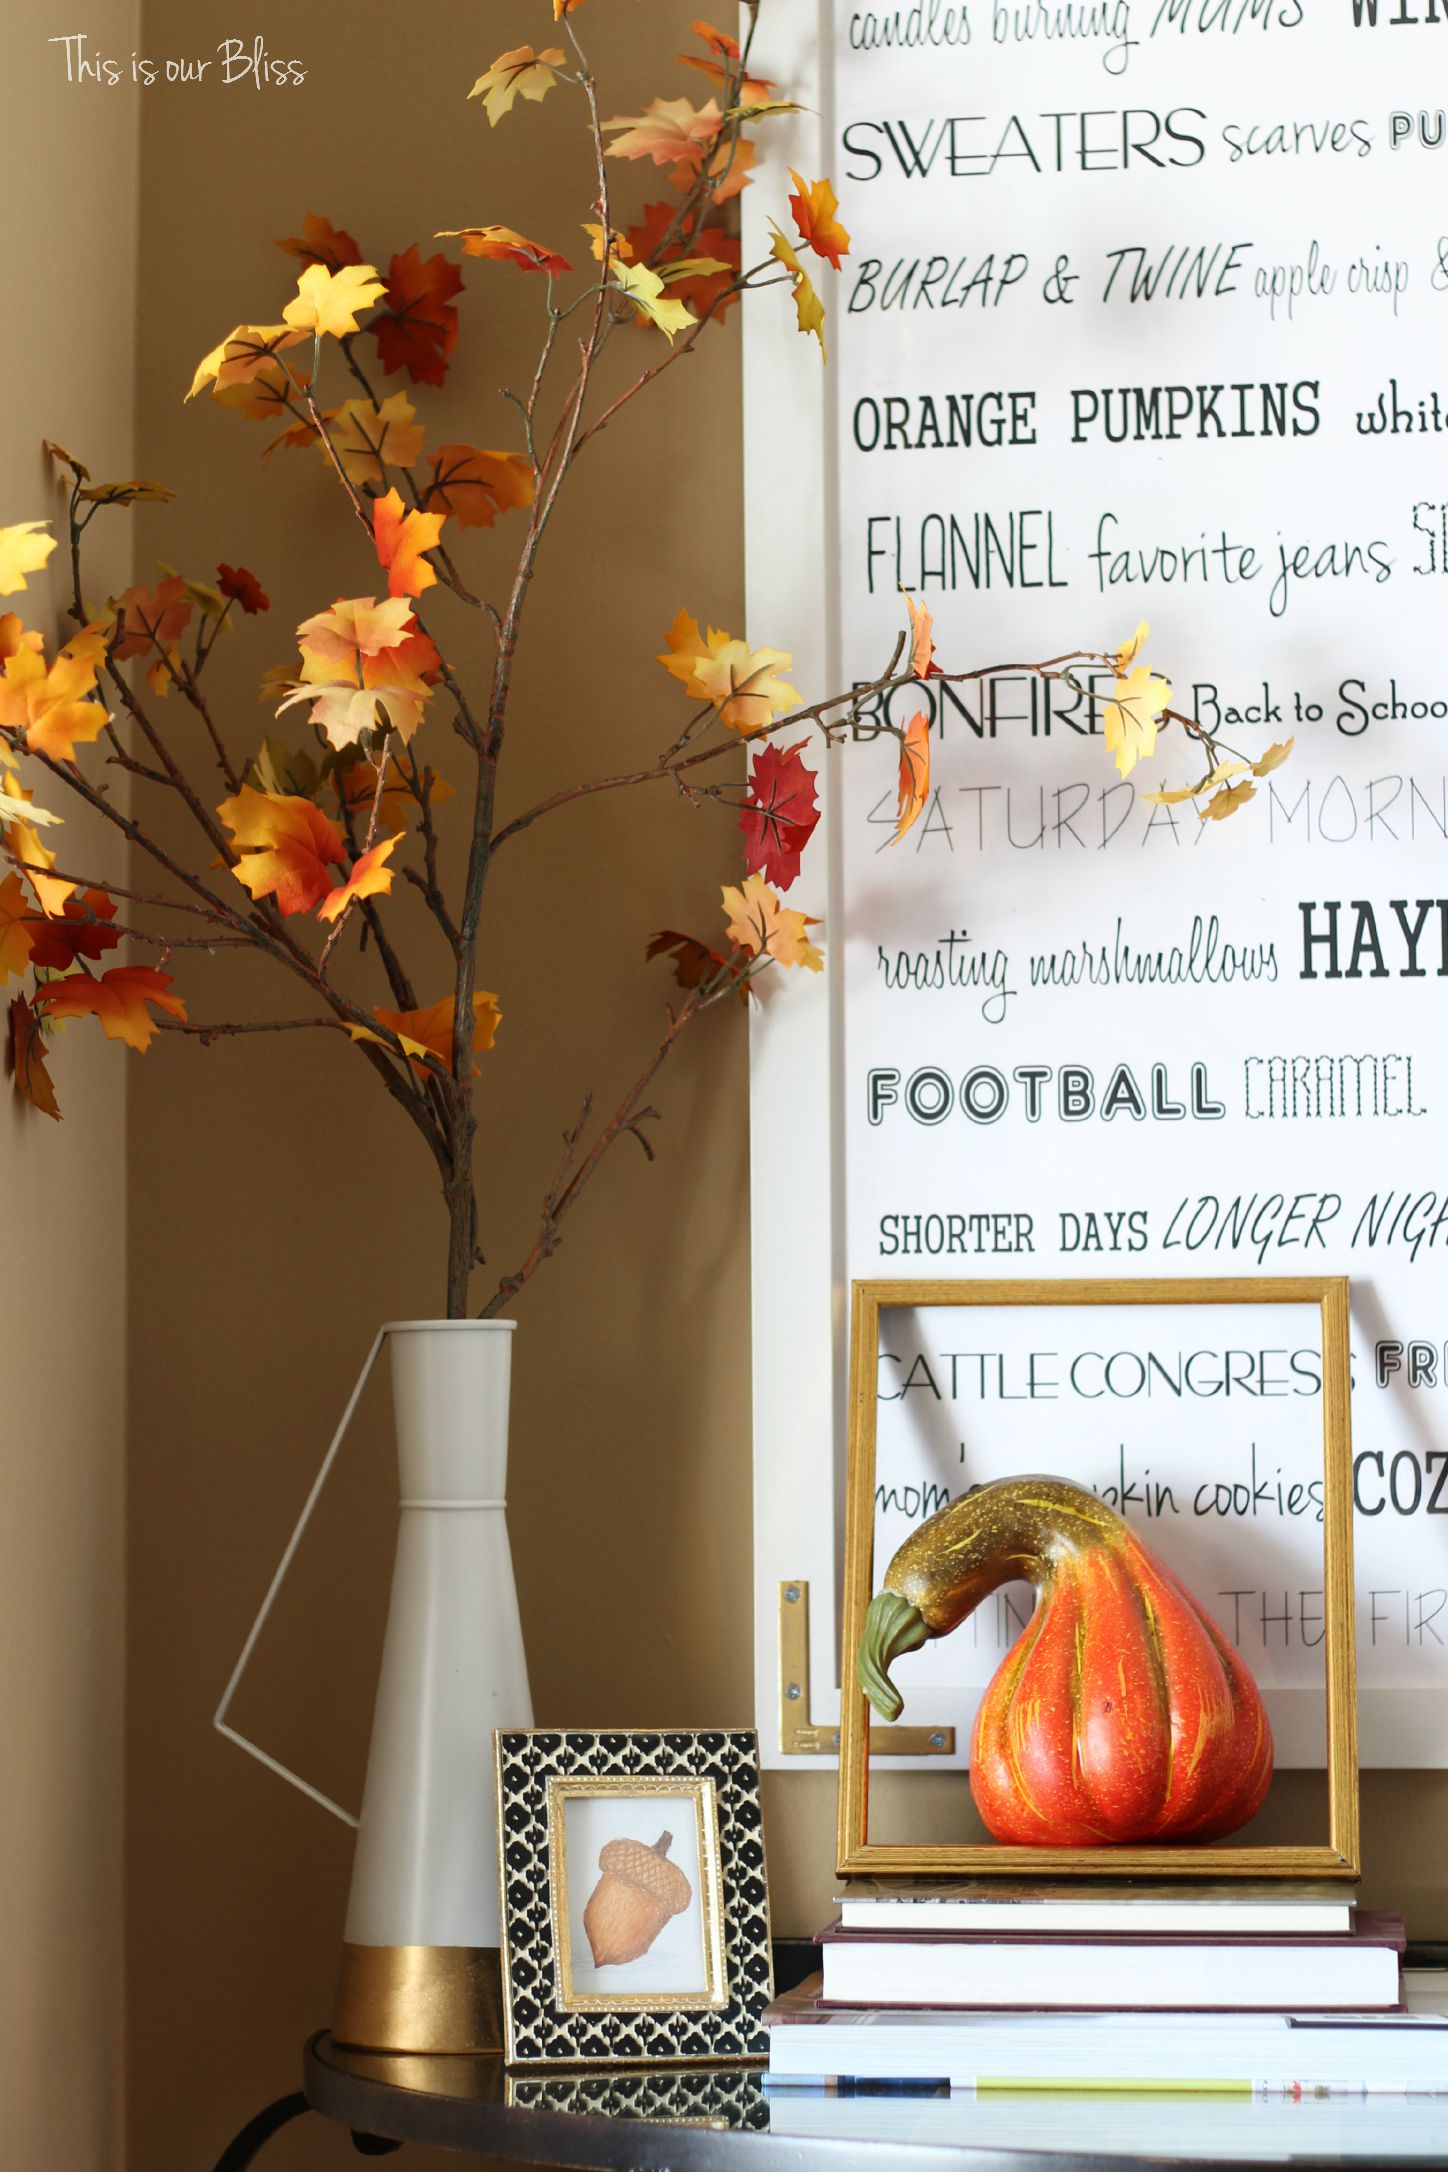 Fall entryway - fall vignette - entryway table styling - fall decor - neutral fall decor - DIY fall word art - leaves - open frame - This is our Bliss